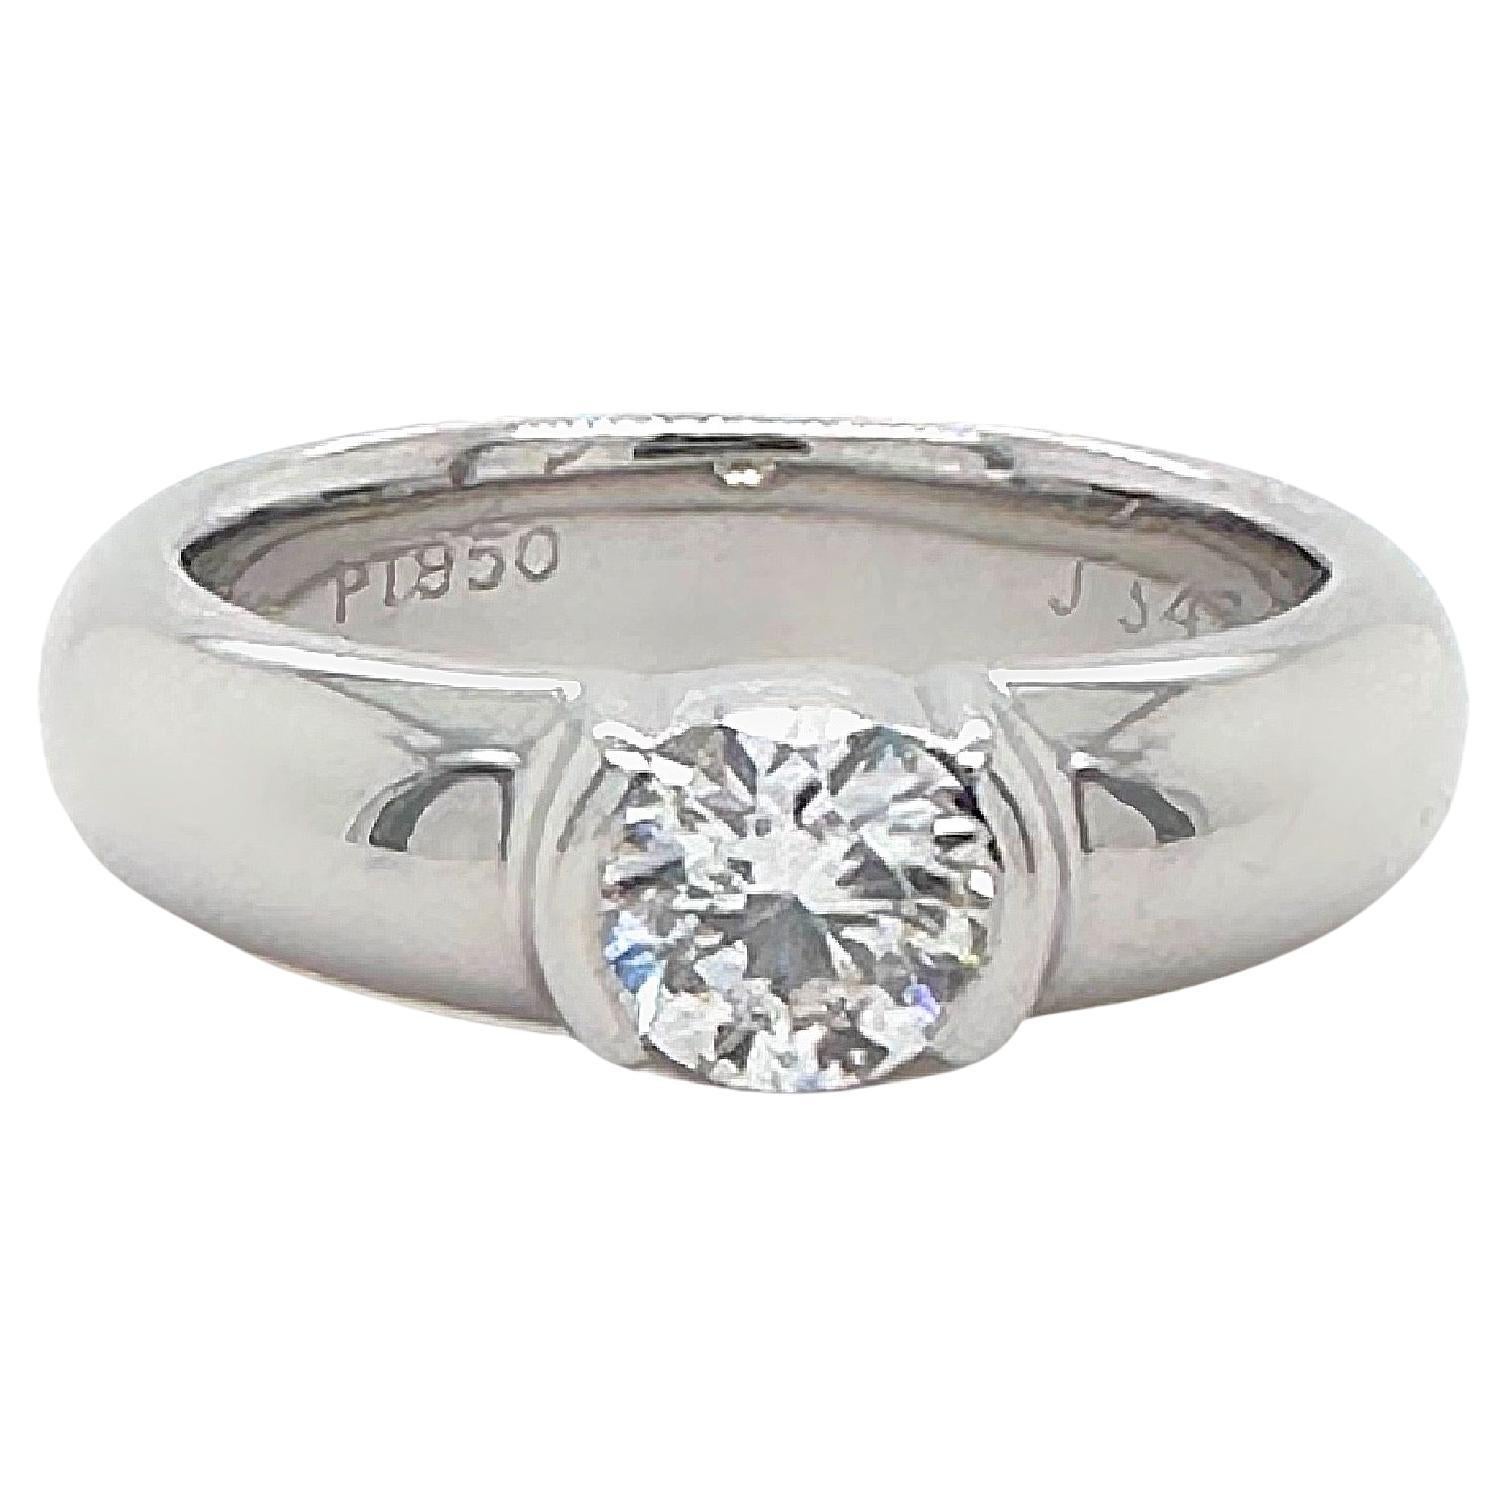 Click to enlarge Have one to sell? Sell now Tiffany & Co. ETOILE Round Diamond 0 For Sale